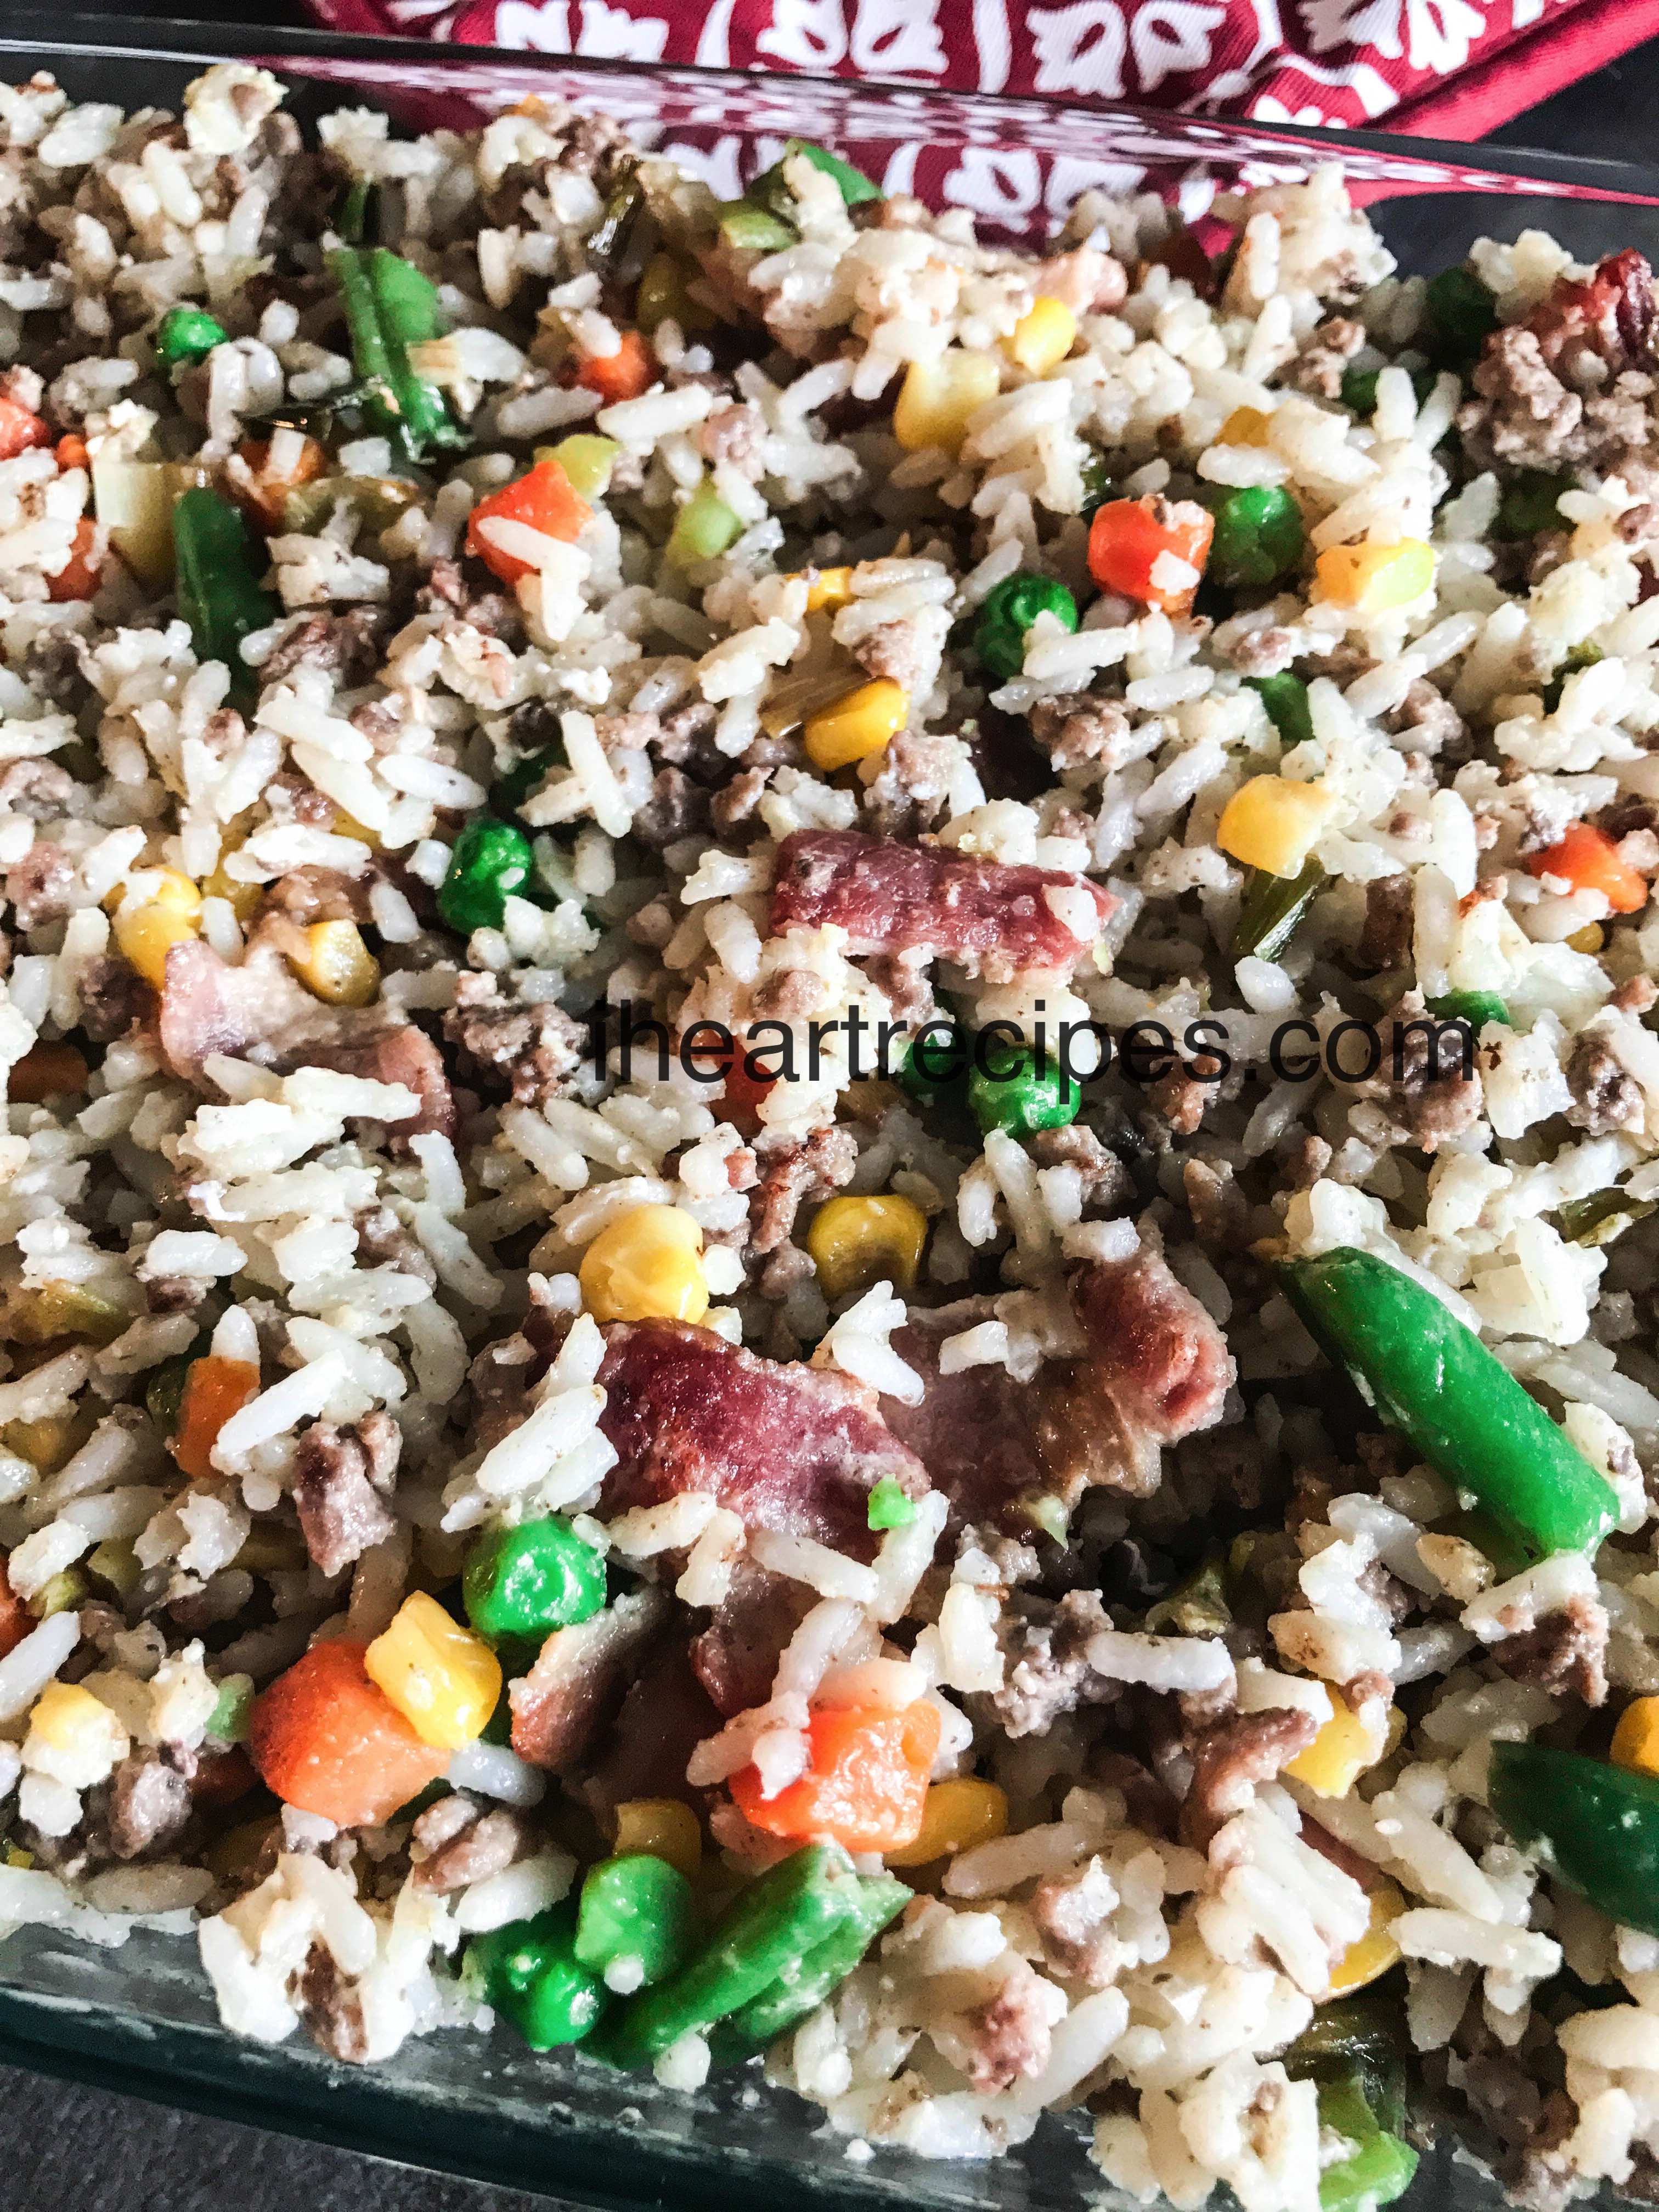 Bacon, carrots, corn, and green beans are just a few of the delicious ingredients in this poor man's fried rice.